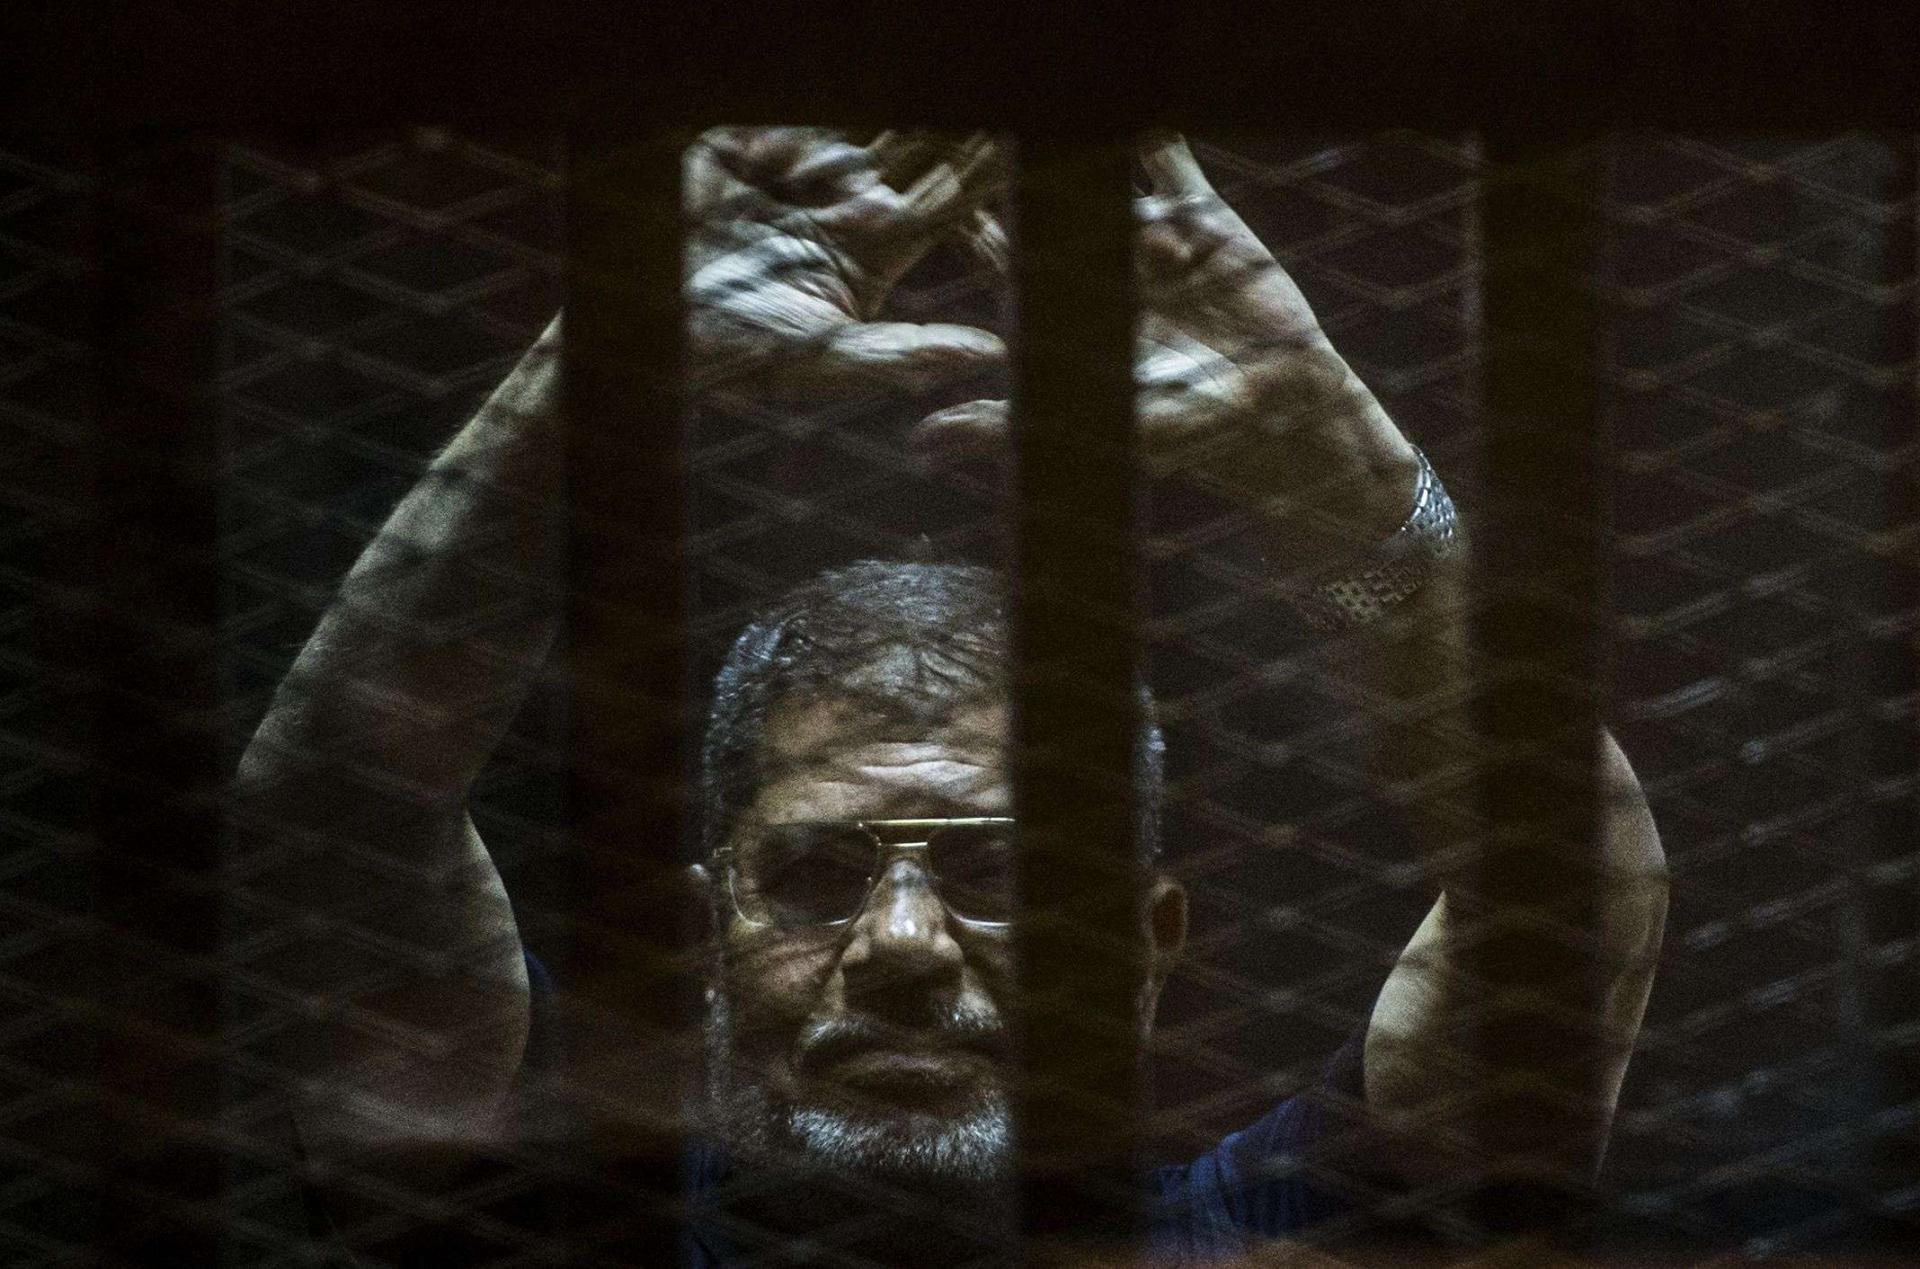 Children of high-profile Islamists detained in the same prison as Morsi before his death have voiced fears for their parent’s health